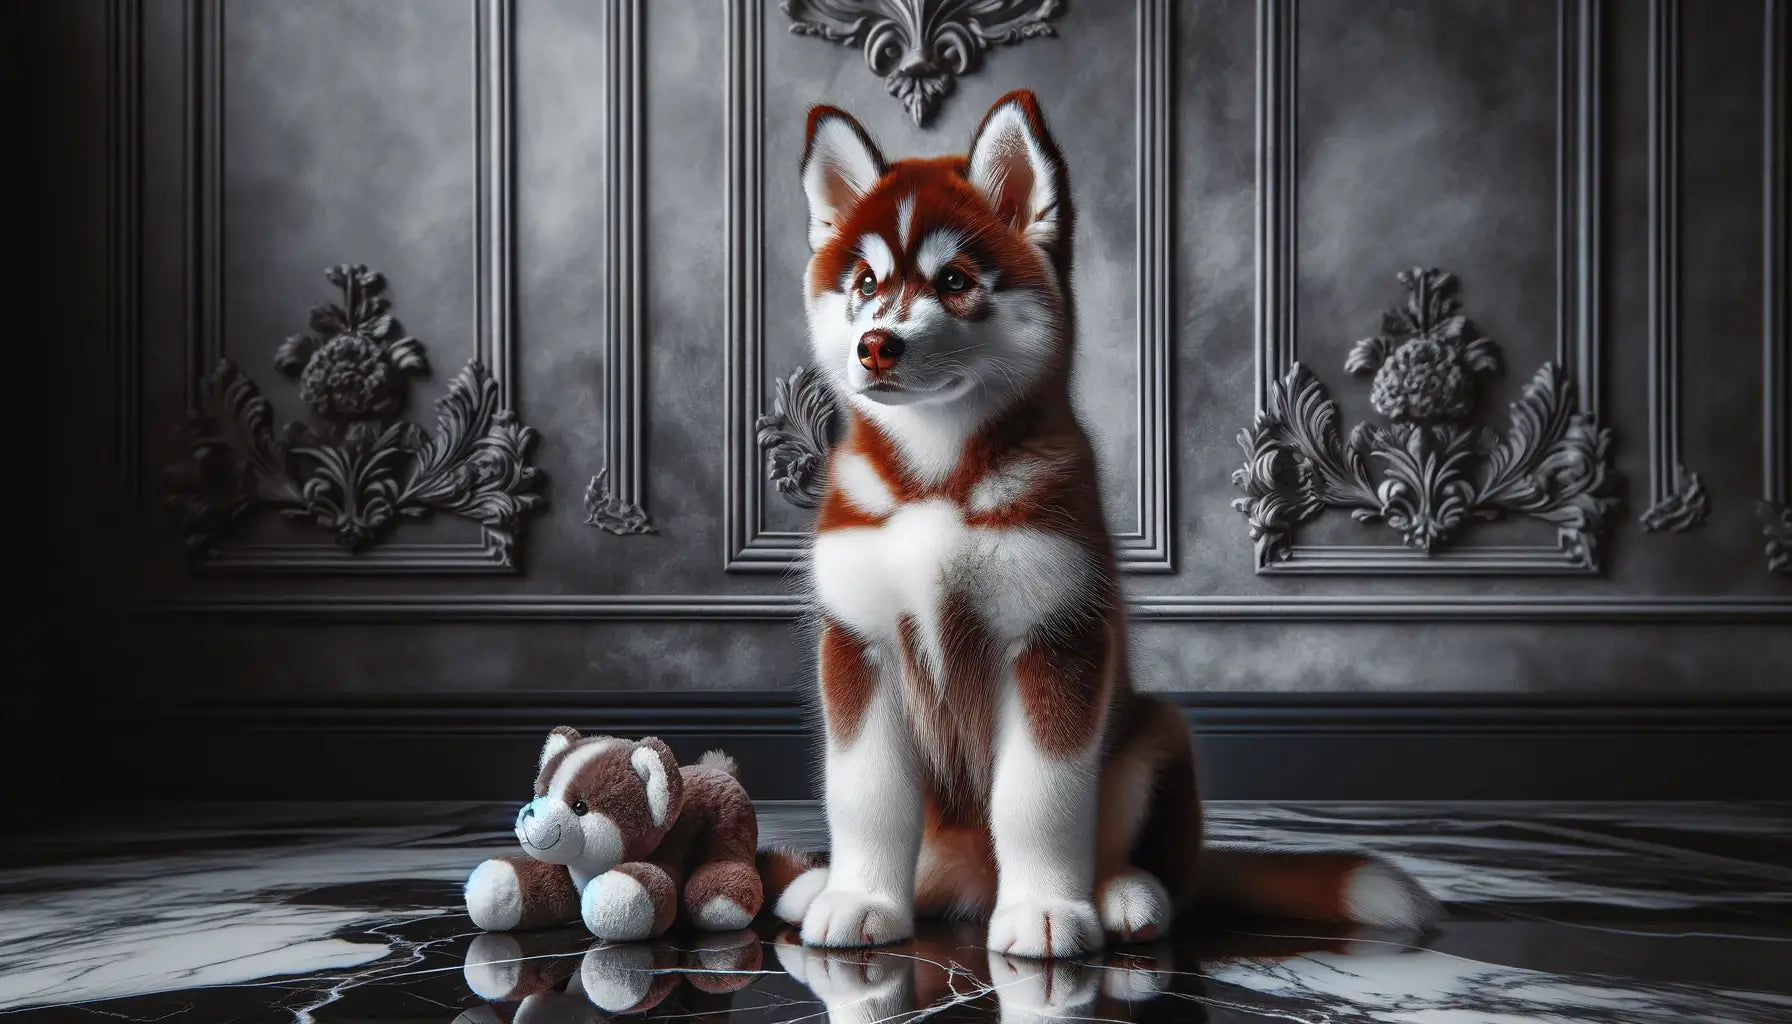 Image showing a Red Husky sitting upright on a marbled floor, with the tricolor fur of its red.